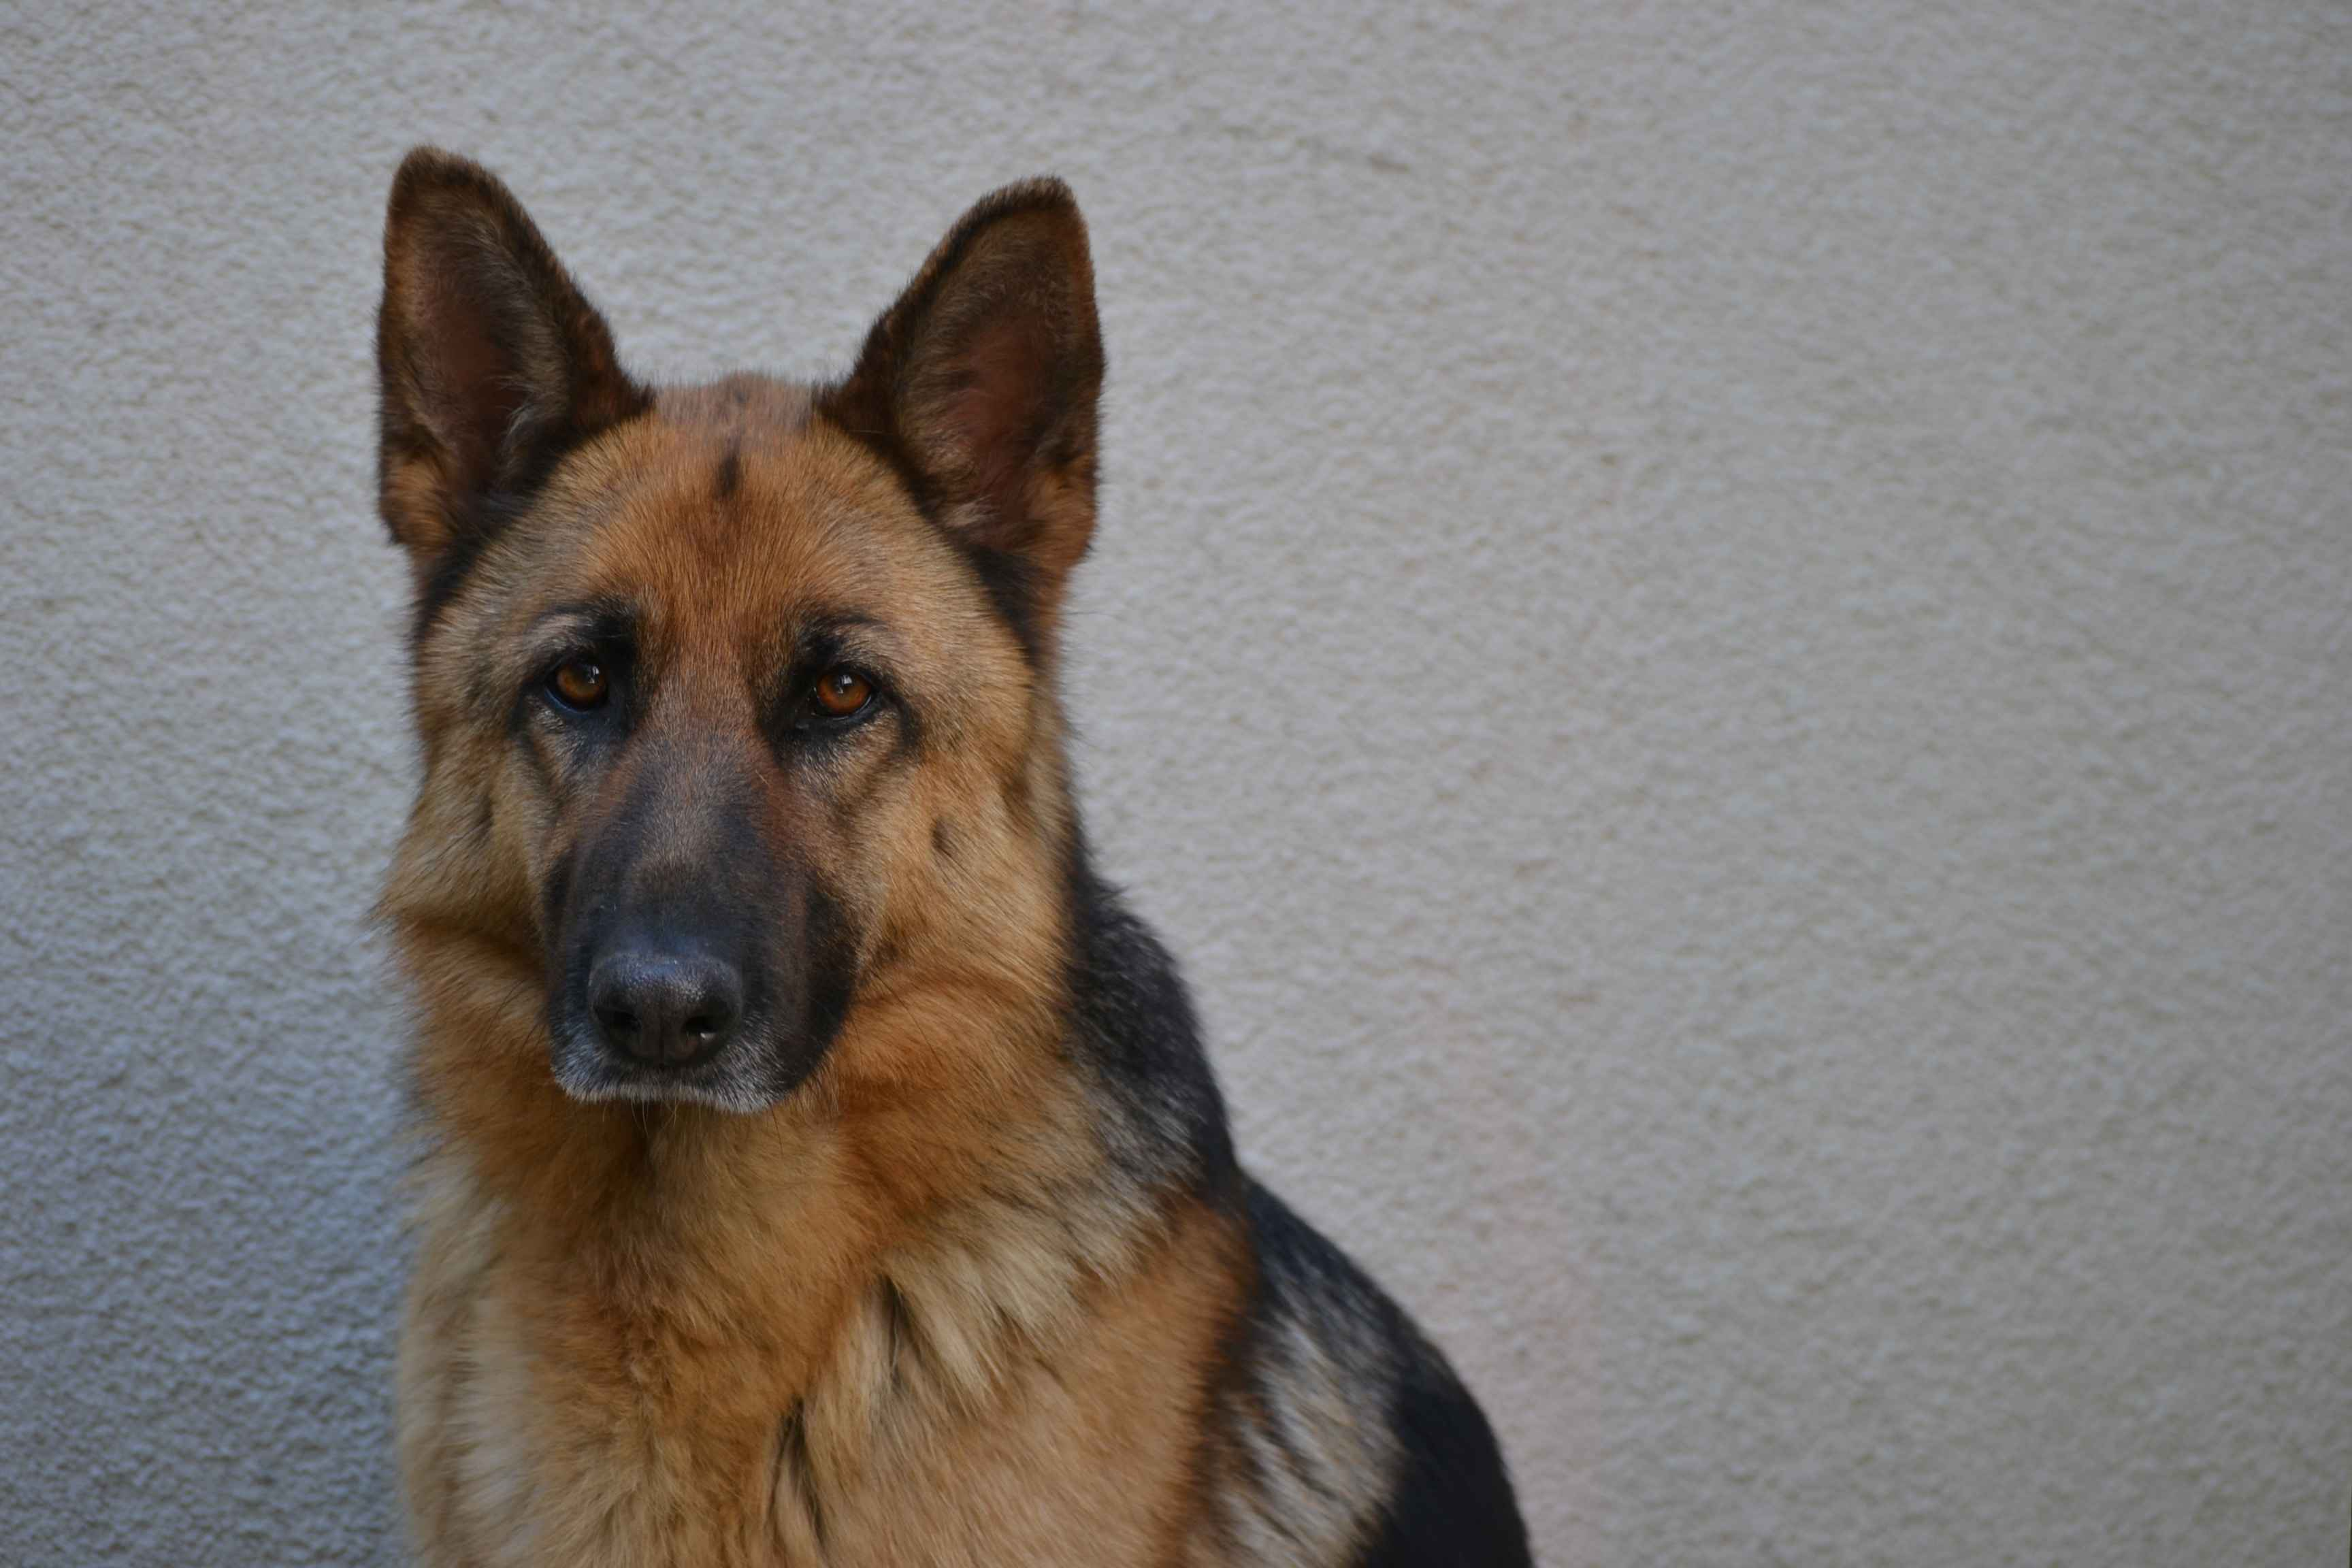 What are the most common health issues that affect German Shepherds?